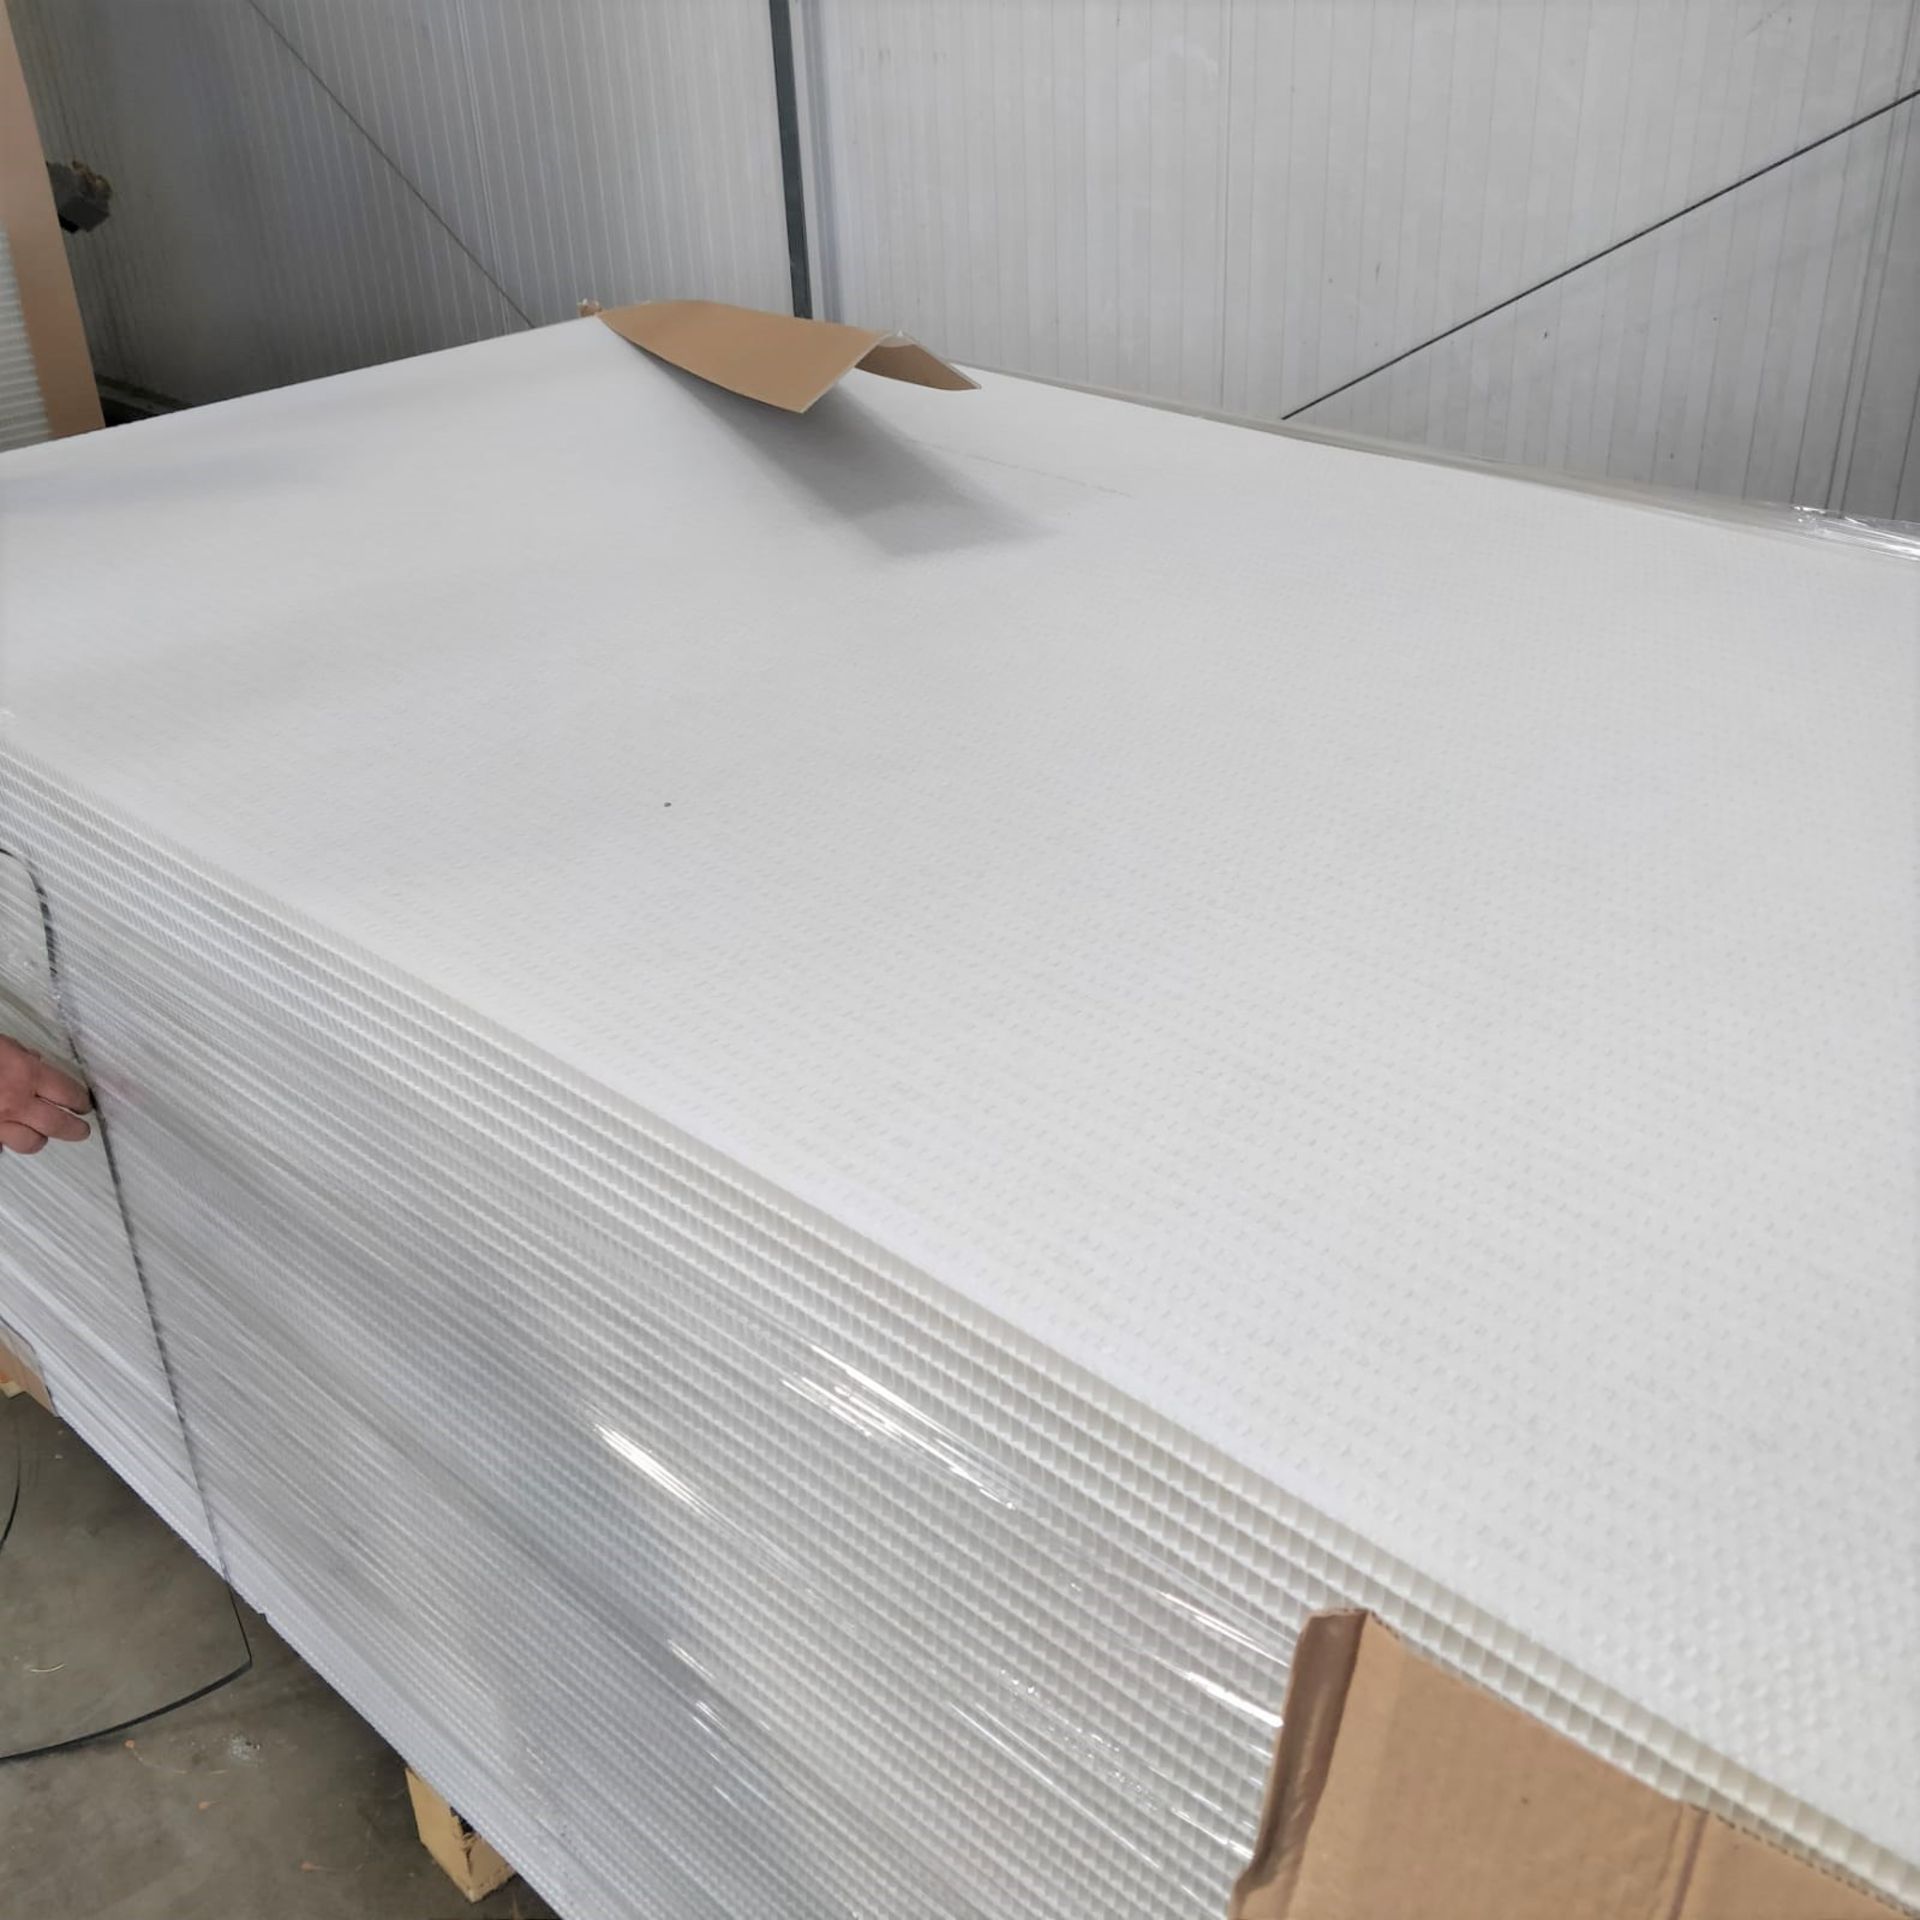 100 x ThermHex Thermoplastic Honeycomb Core Panels - Size: 693 x 1210 x 20mm - New Stock - - Image 6 of 7